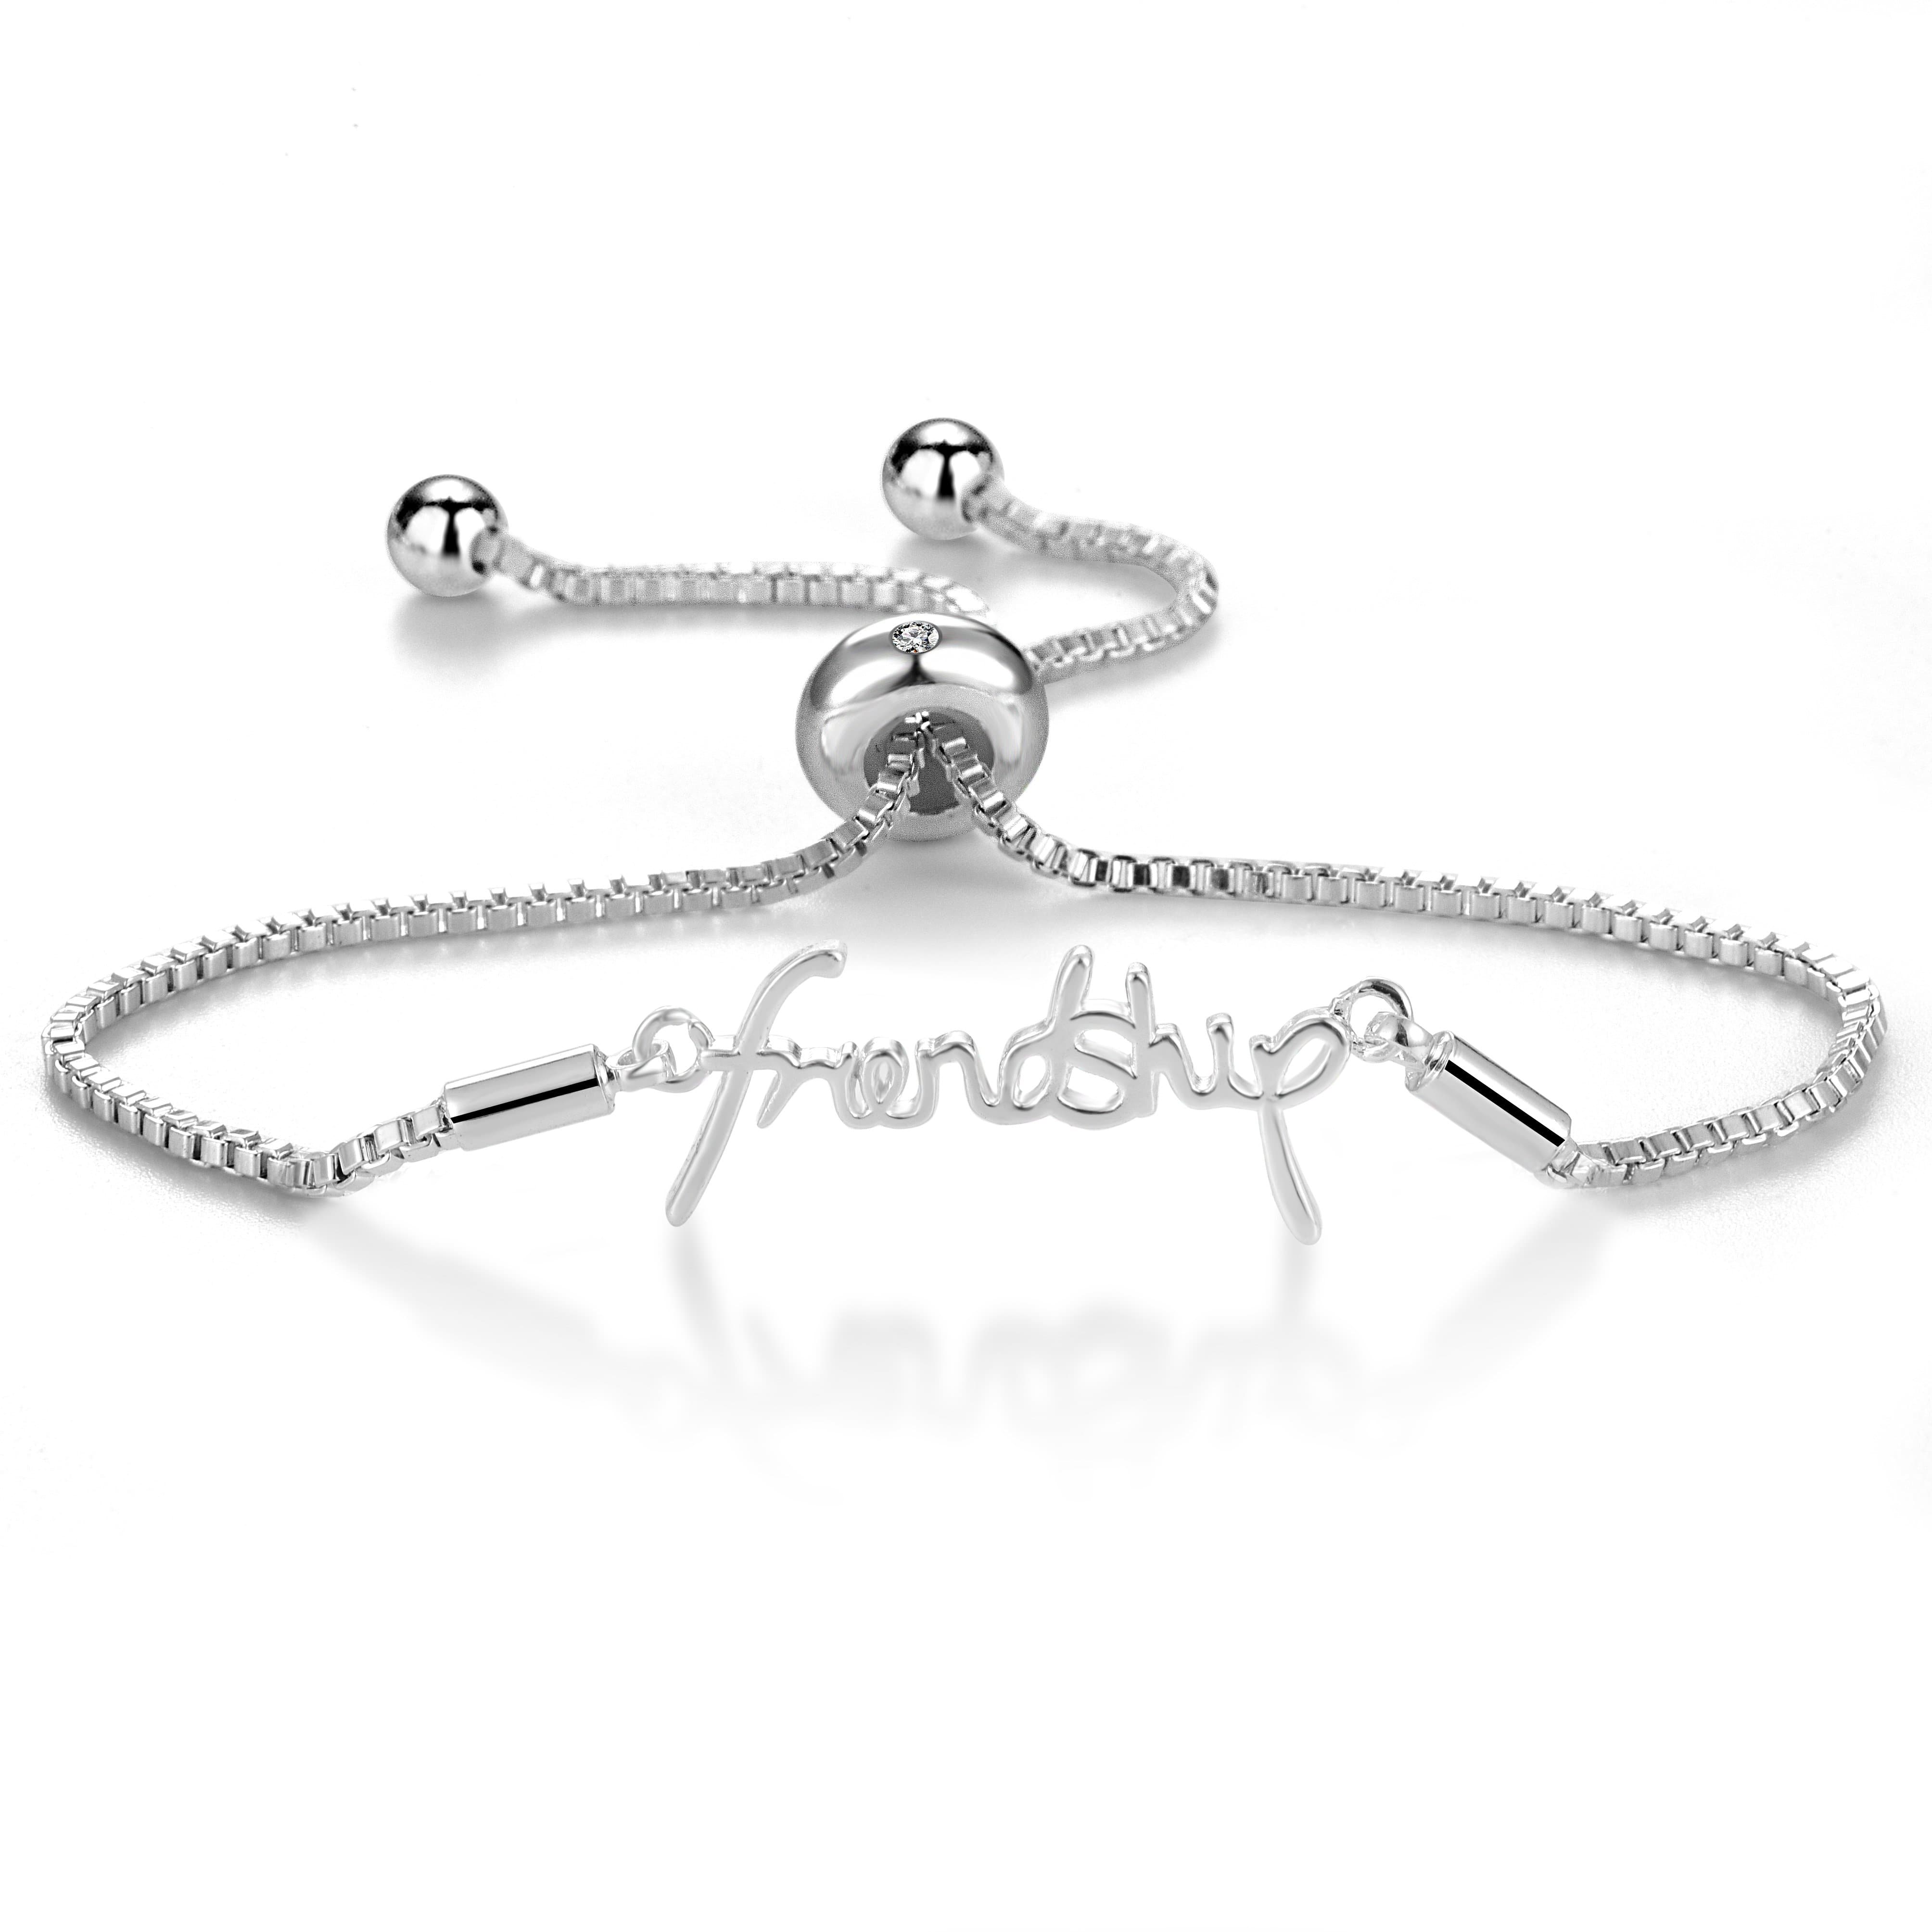 Silver Plated Friendship Bracelet Created with Zircondia® Crystals